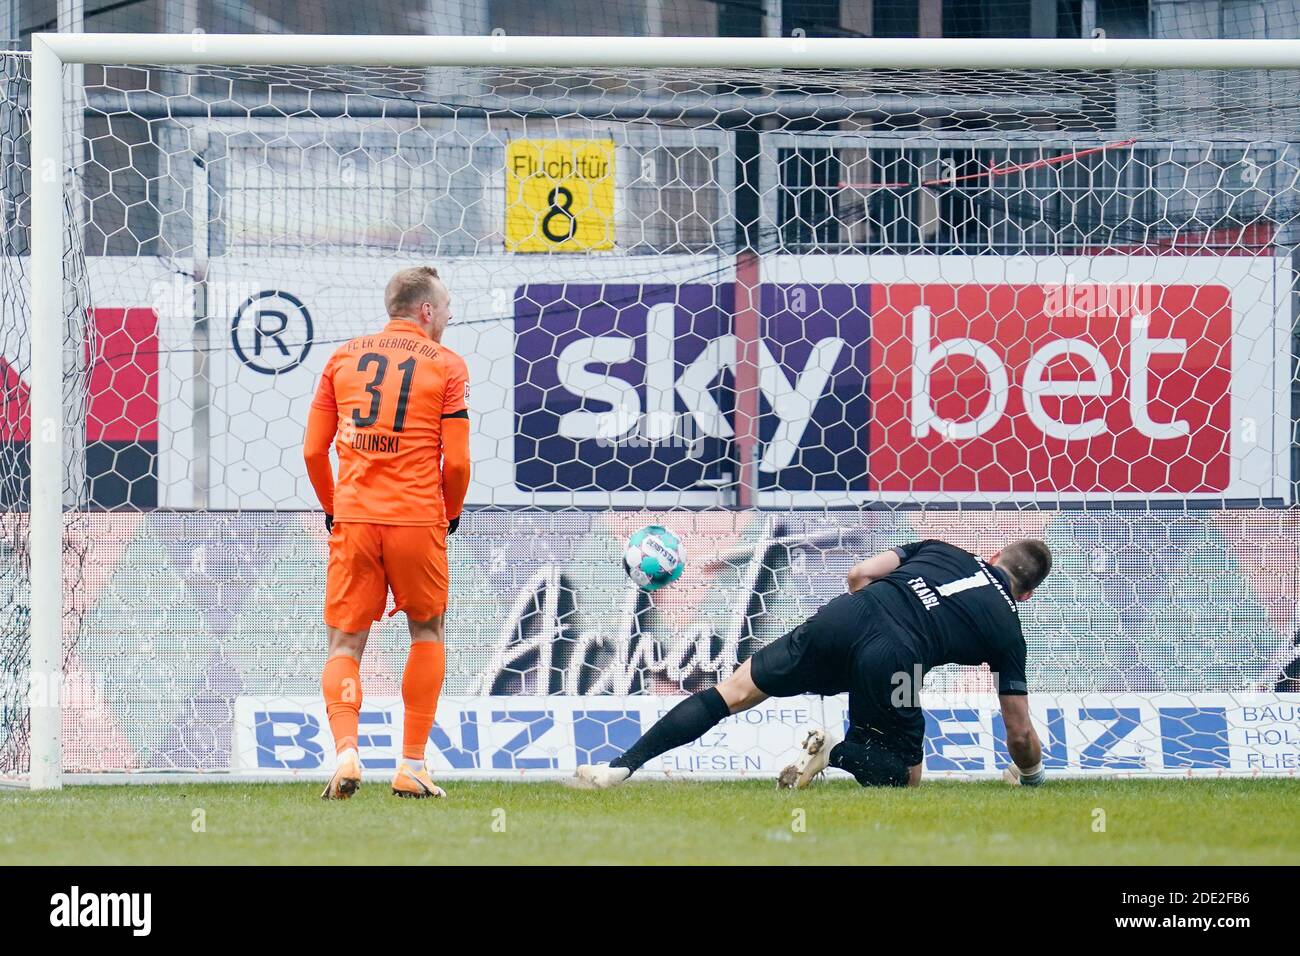 Sandhausen, Germany. 28th Nov, 2020. Football: 2nd Bundesliga, SV Sandhausen - FC Erzgebirge Aue, 9th matchday, Hardtwaldstadion. Ben Zolinski (l) from Erzgebirge Aue shoots past Sandhausen goalkeeper Martin Fraisl to score the goal for 1:3. Credit: Uwe Anspach/dpa - IMPORTANT NOTE: In accordance with the regulations of the DFL Deutsche Fußball Liga and the DFB Deutscher Fußball-Bund, it is prohibited to exploit or have exploited in the stadium and/or from the game taken photographs in the form of sequence images and/or video-like photo series./dpa/Alamy Live News Stock Photo